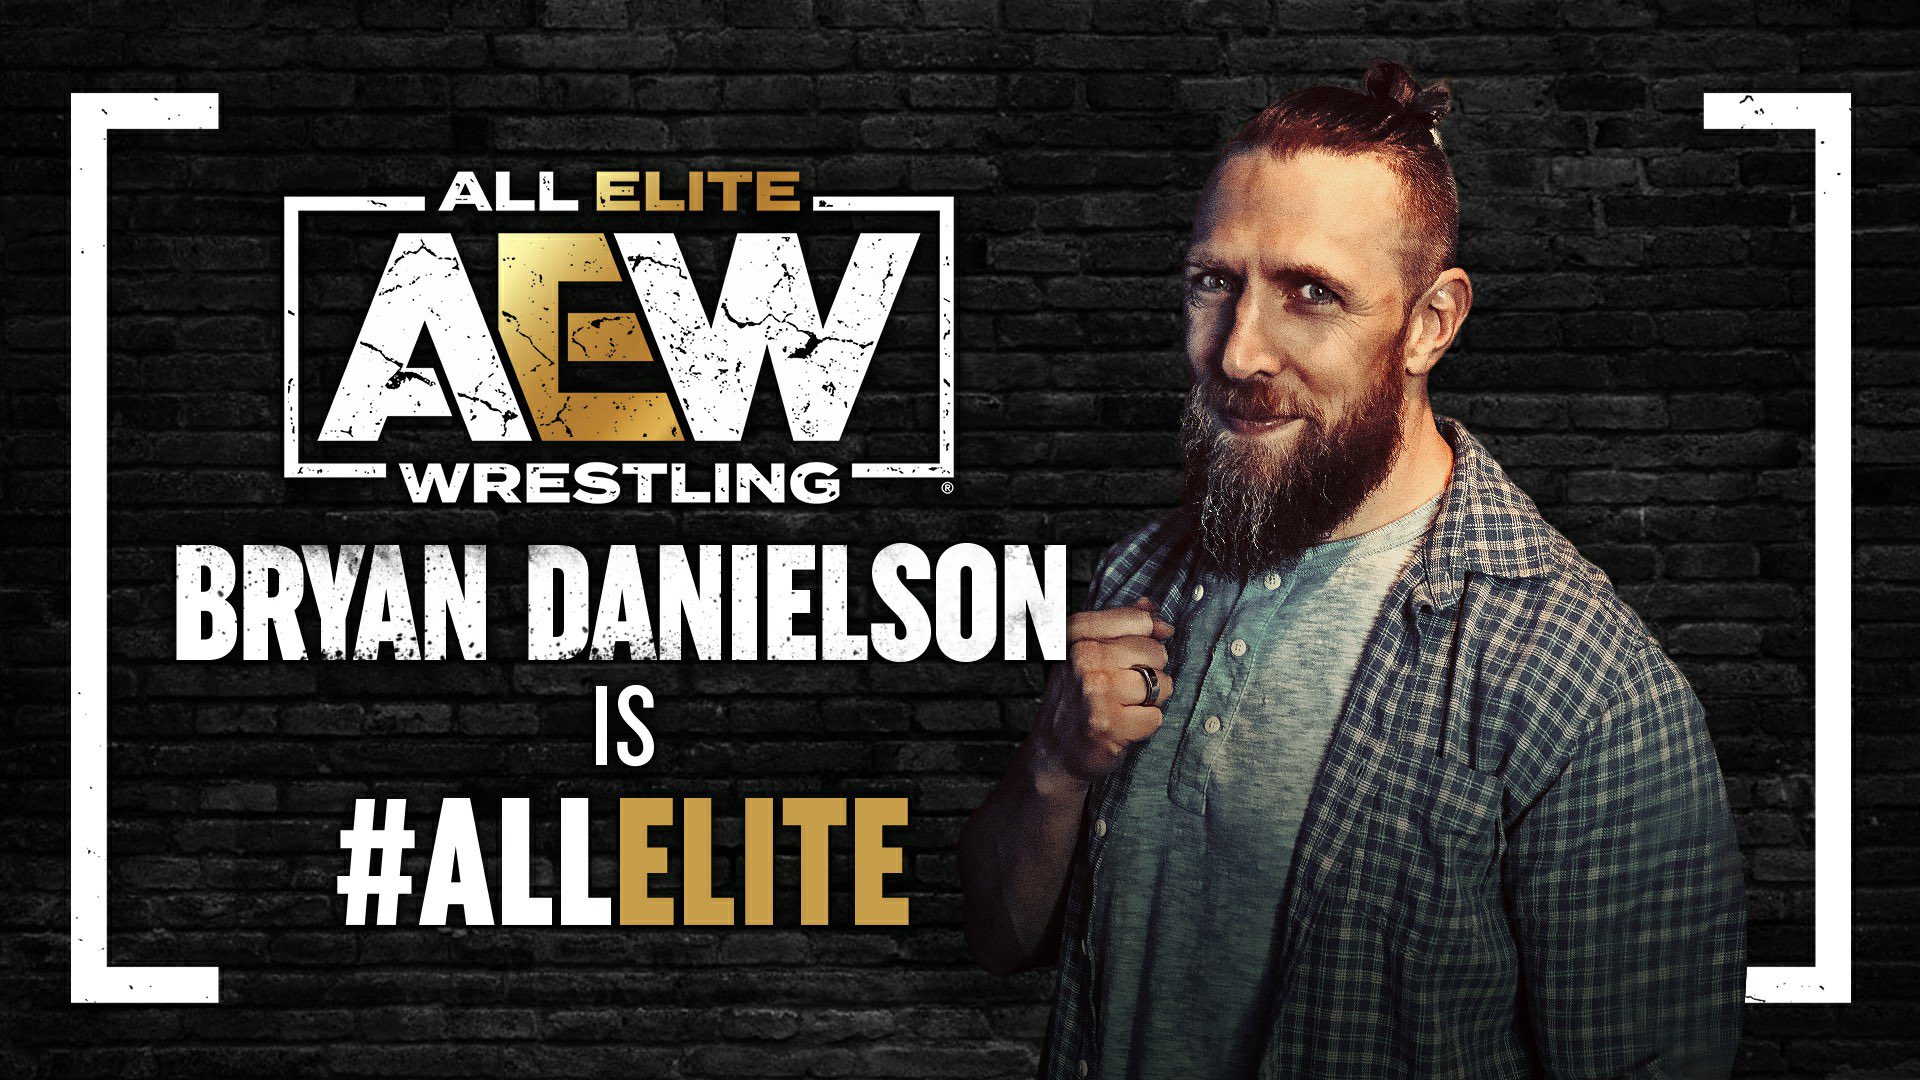 Bryan Danielson signs with All Elite Wrestling